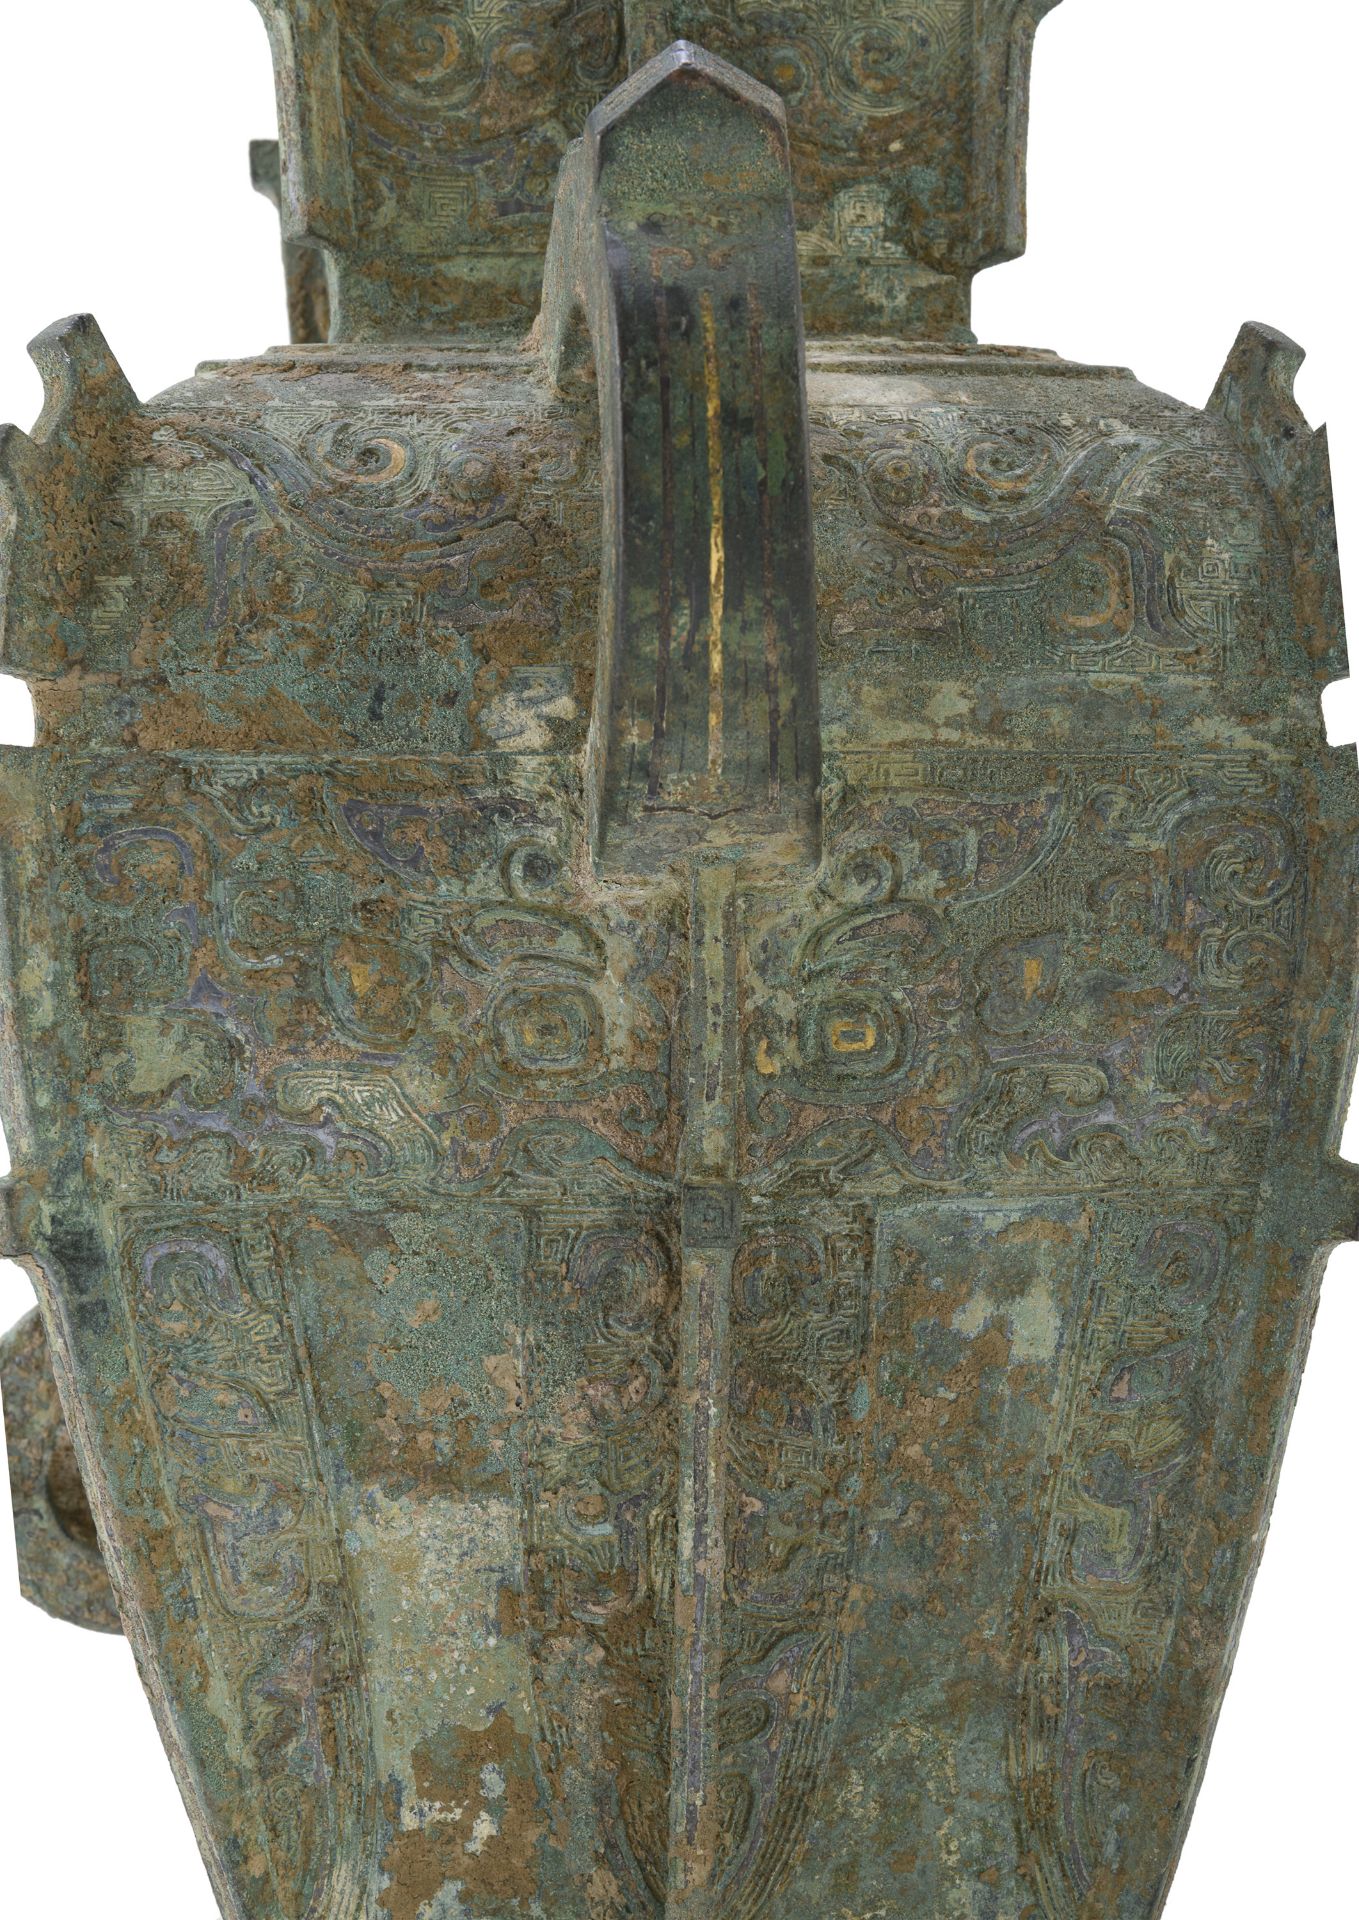 A VERY RARE AND IMPORTANT BRONZE RITUAL WINE VESSEL CHINA 13TH-14TH CENTURY - Image 6 of 7